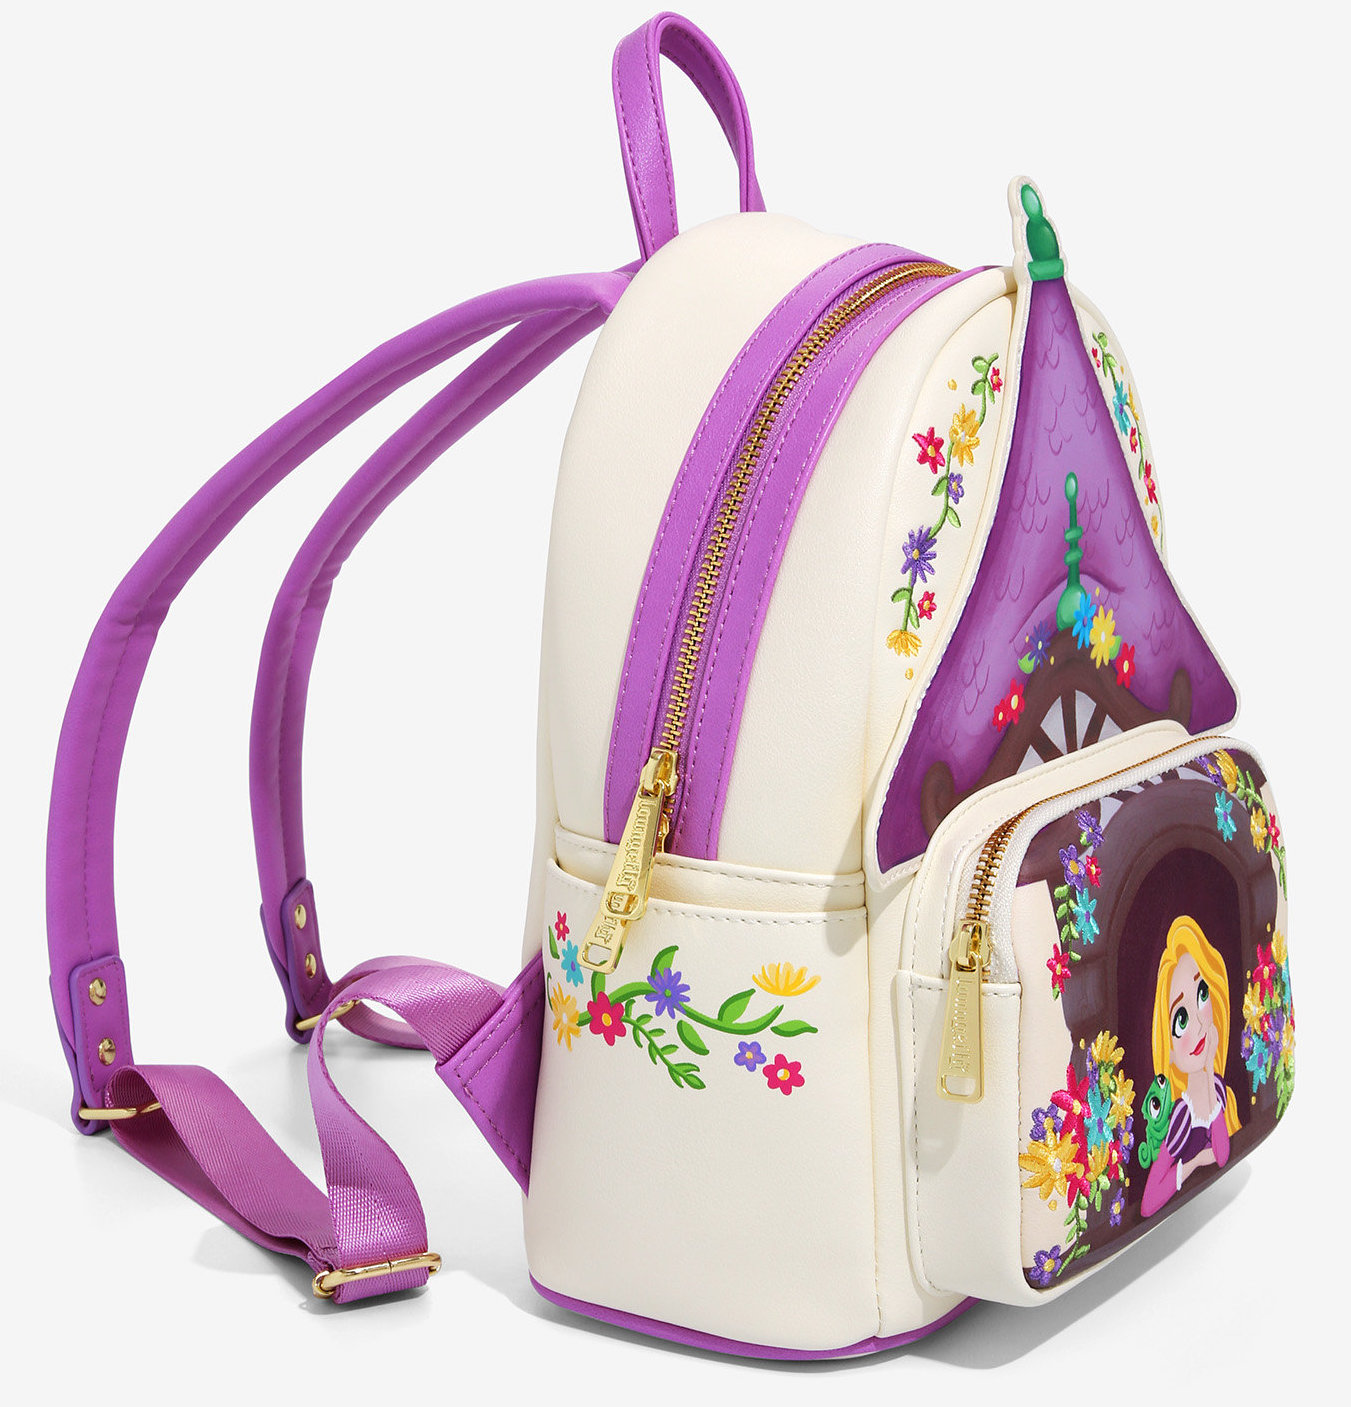 Celebrate Tangled's 10th Anniversary With 3 New Disney Loungeflys